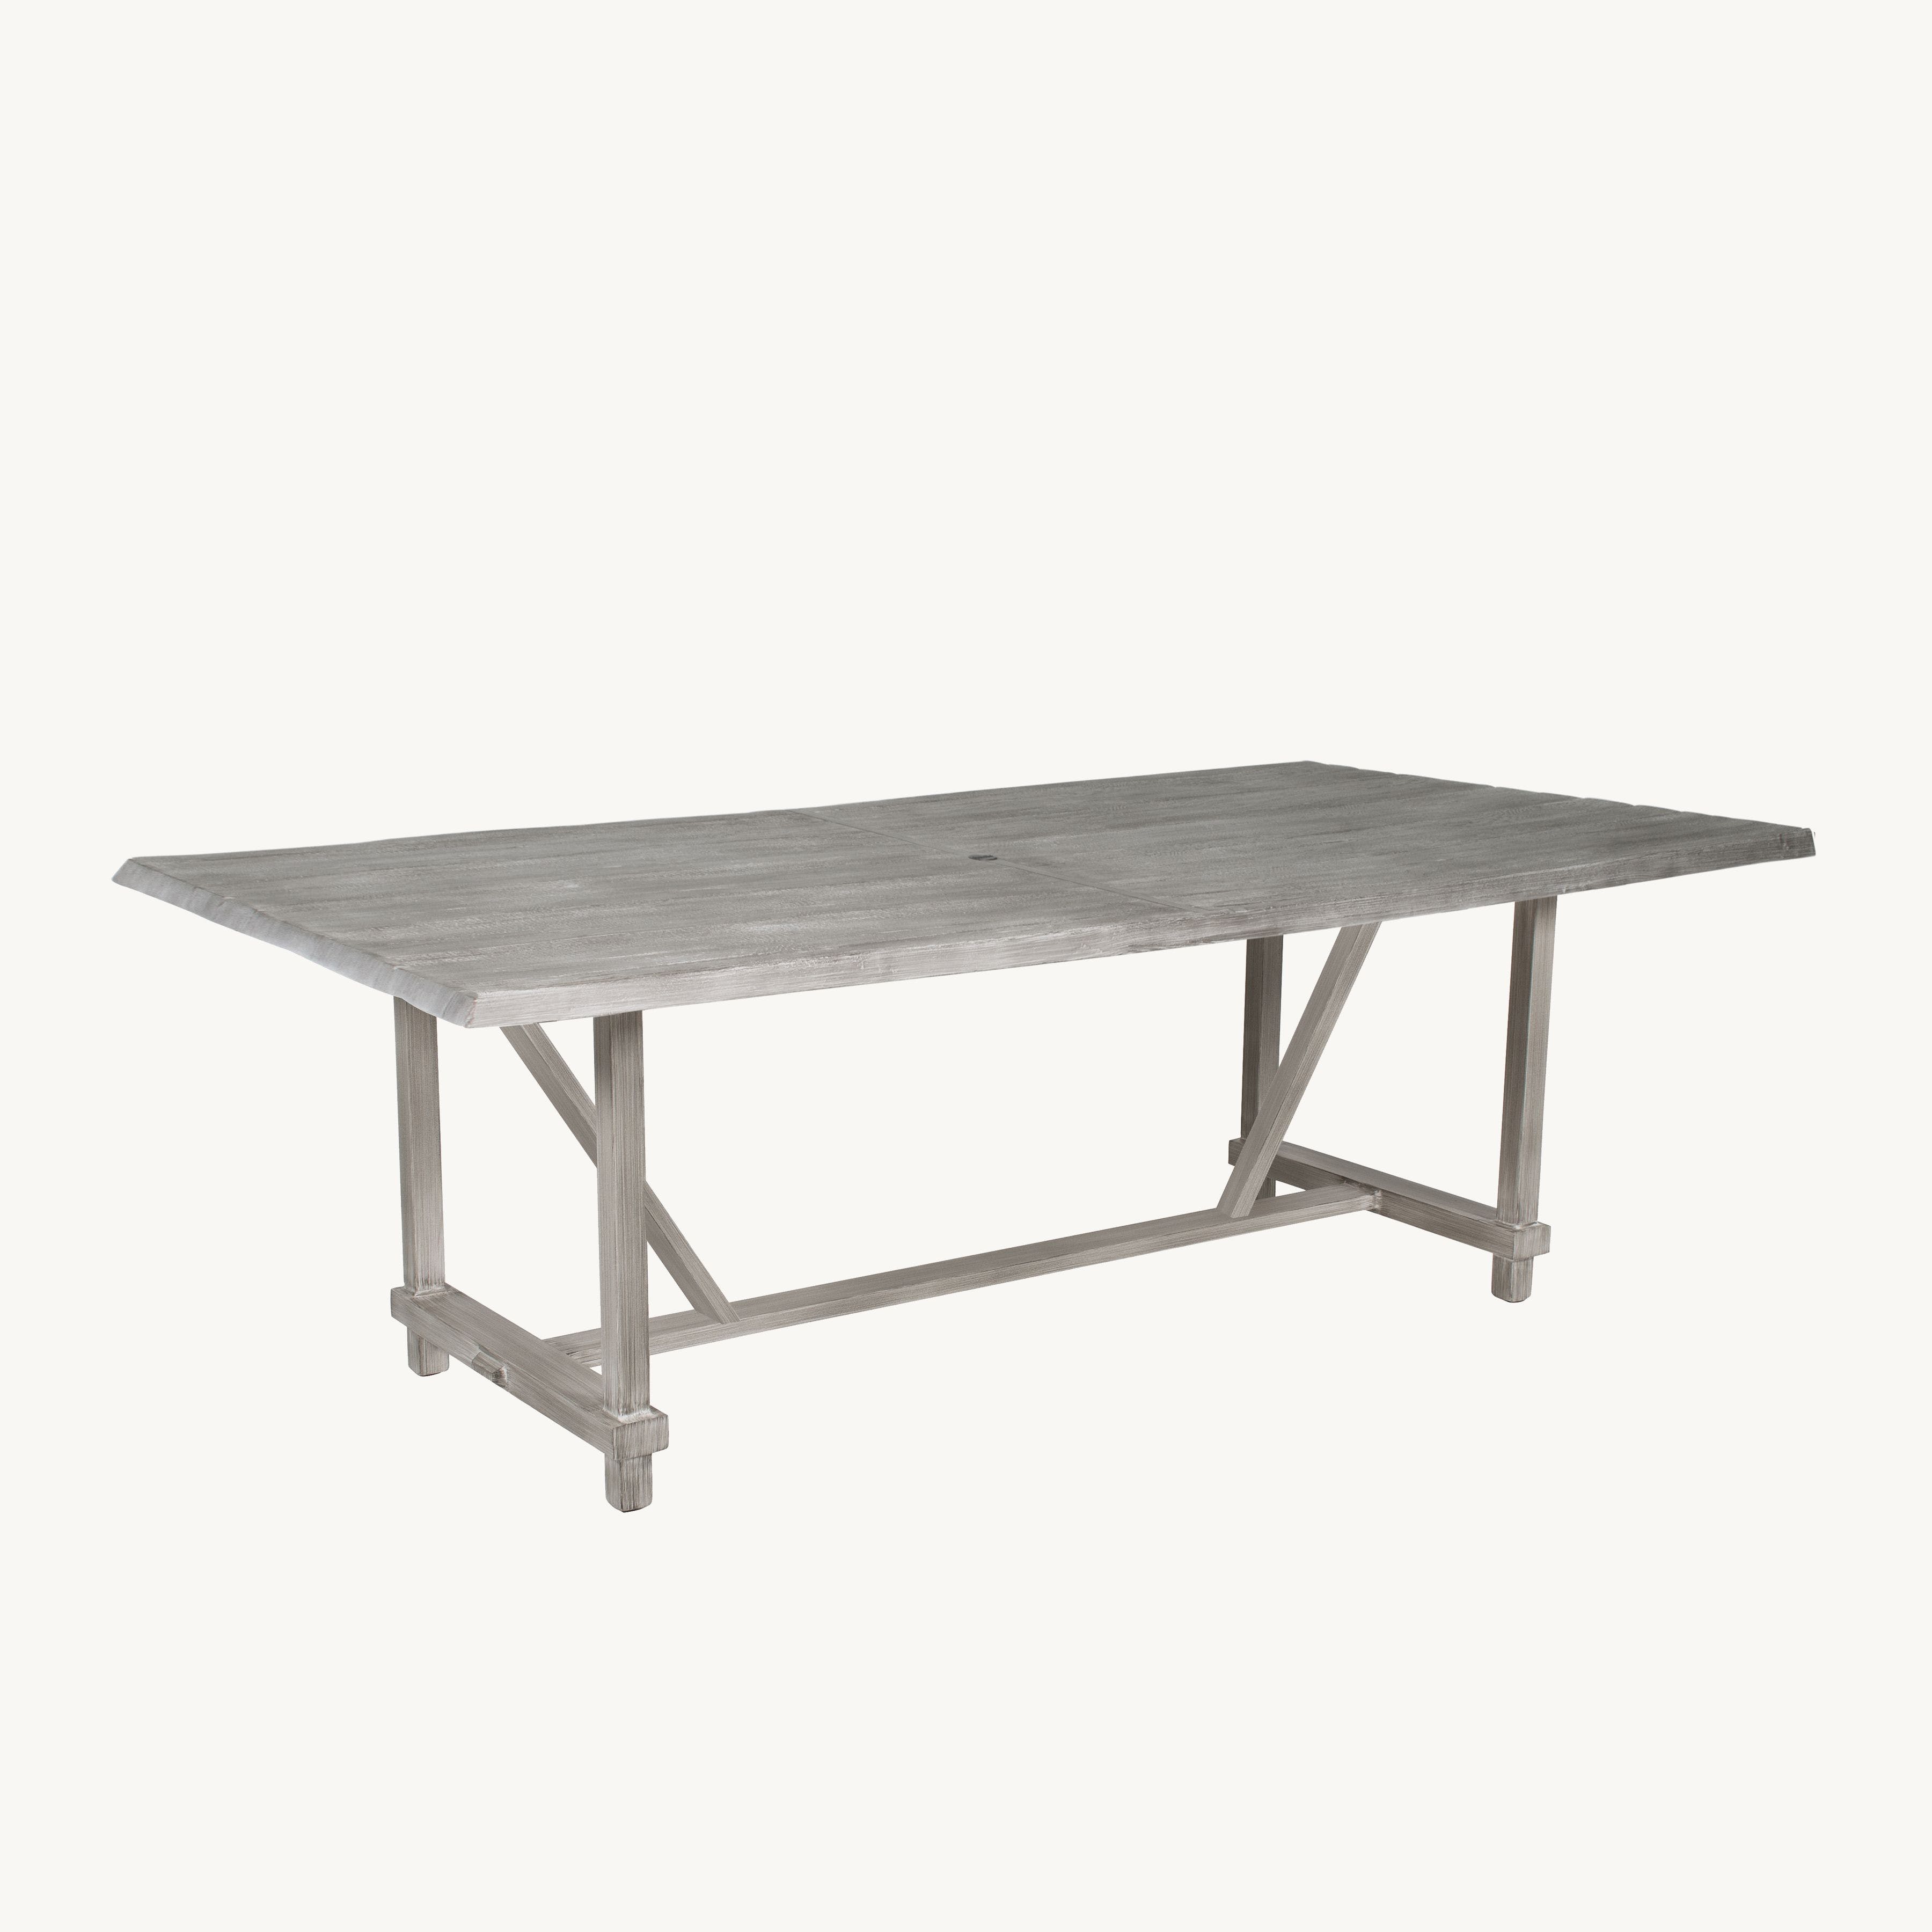 Antler Hill 44" X 84" Rectangular Dining Table By Castelle